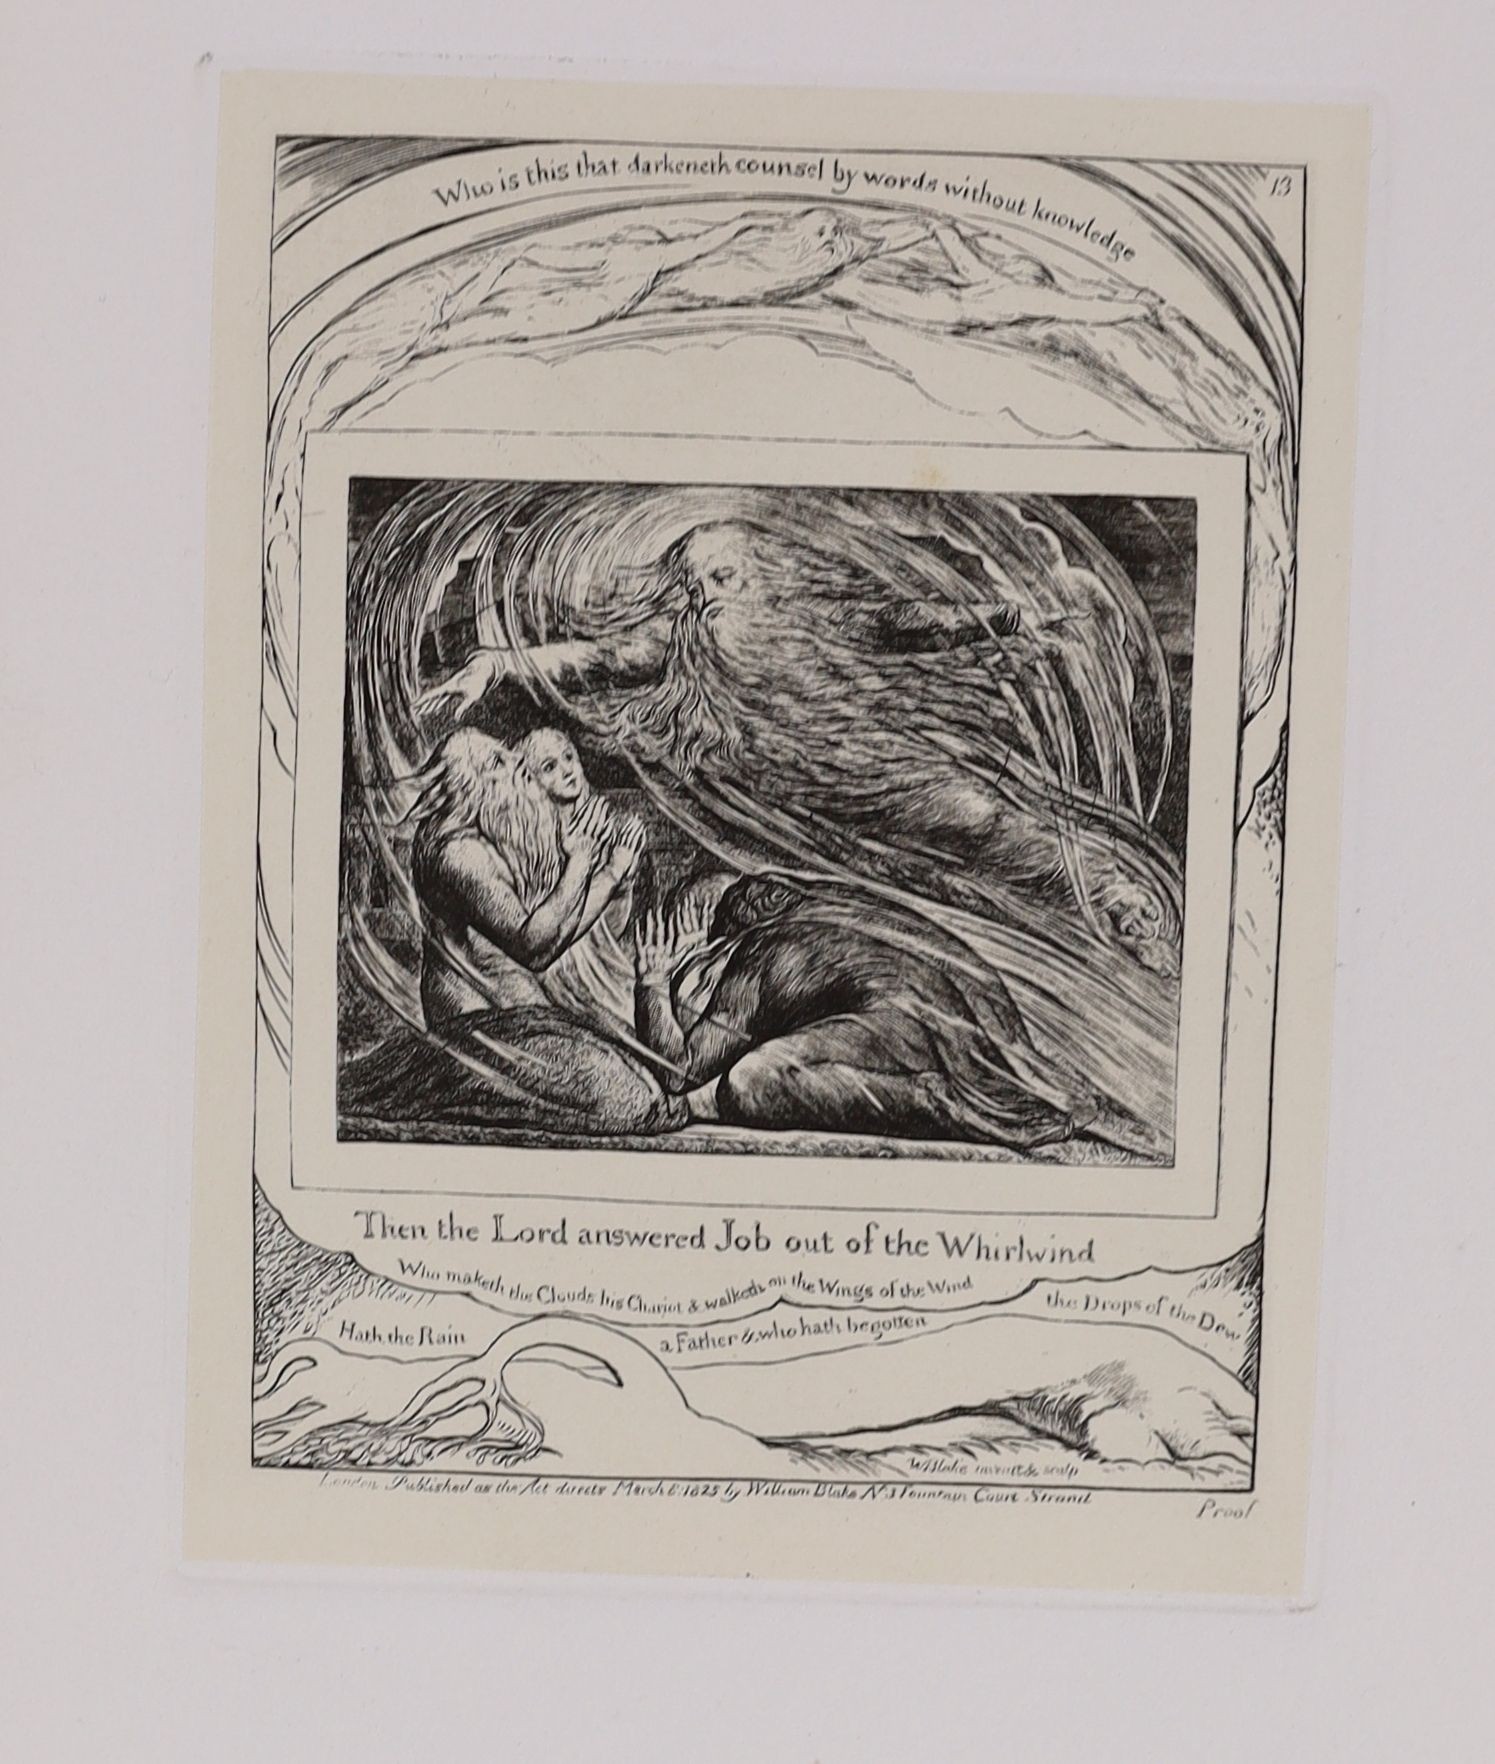 William Blake - Book of Job, 21 facsimile plates, one of 100, half cloth folio, plates 18 x 13cms., 1903. Bookplate of Bache Matthews (1876-1948) Birmingham Repertory theatre manager and author of A History of the Birmin